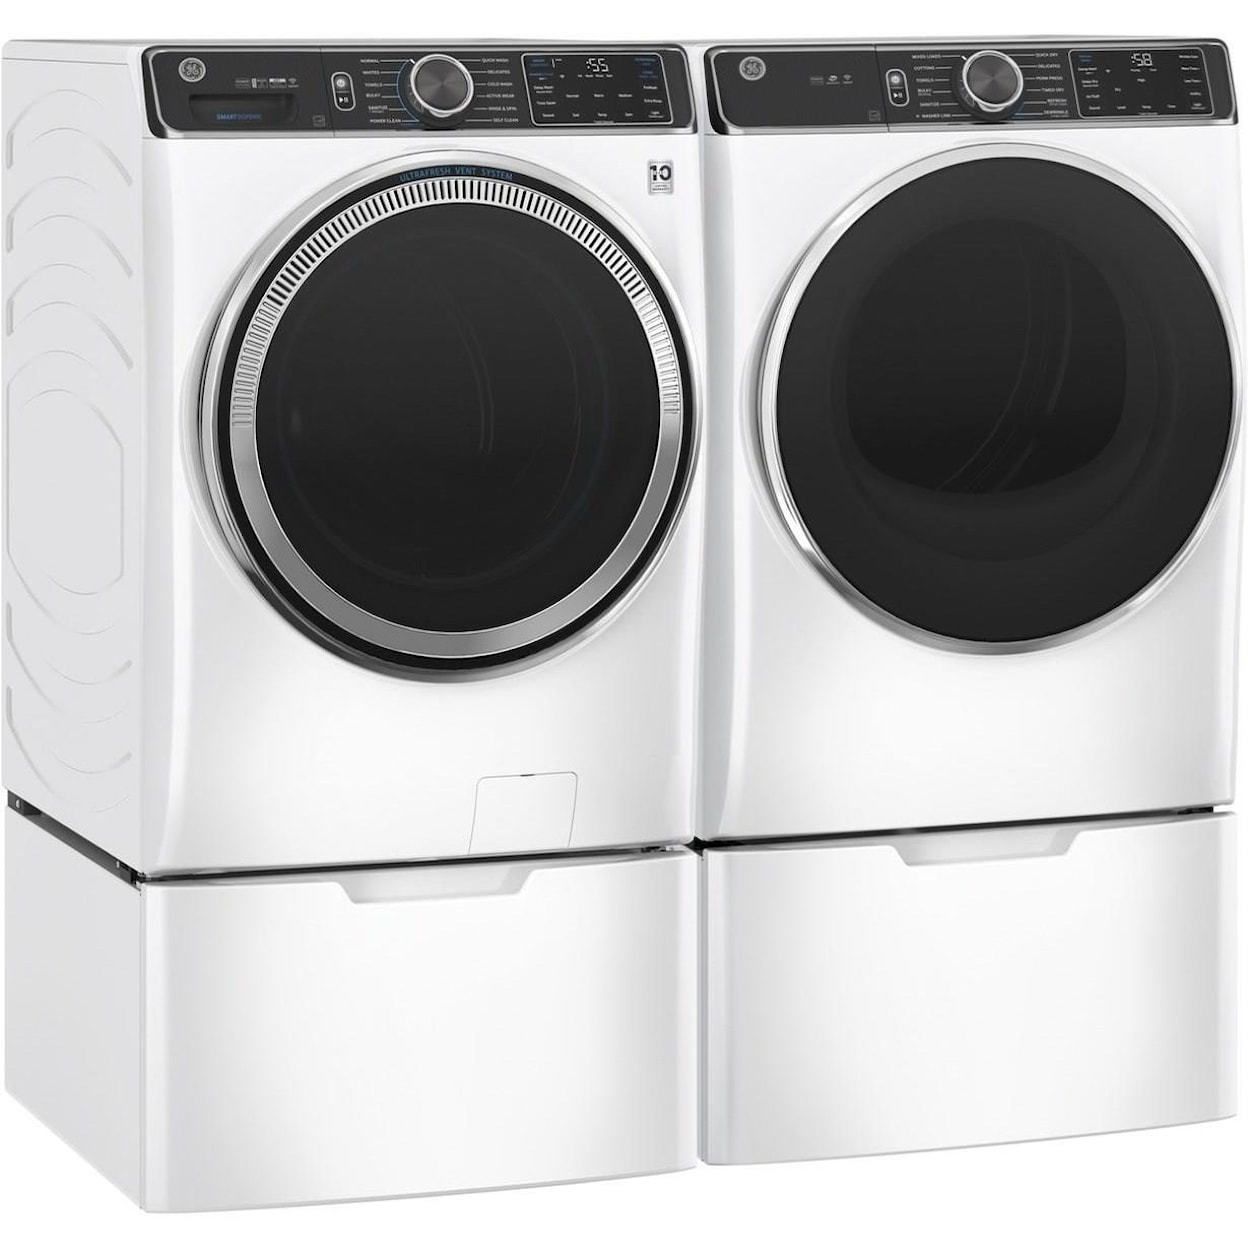 GE Appliances Home Laundry GE® 7.8 cu. ft. Capacity Gas Dryer